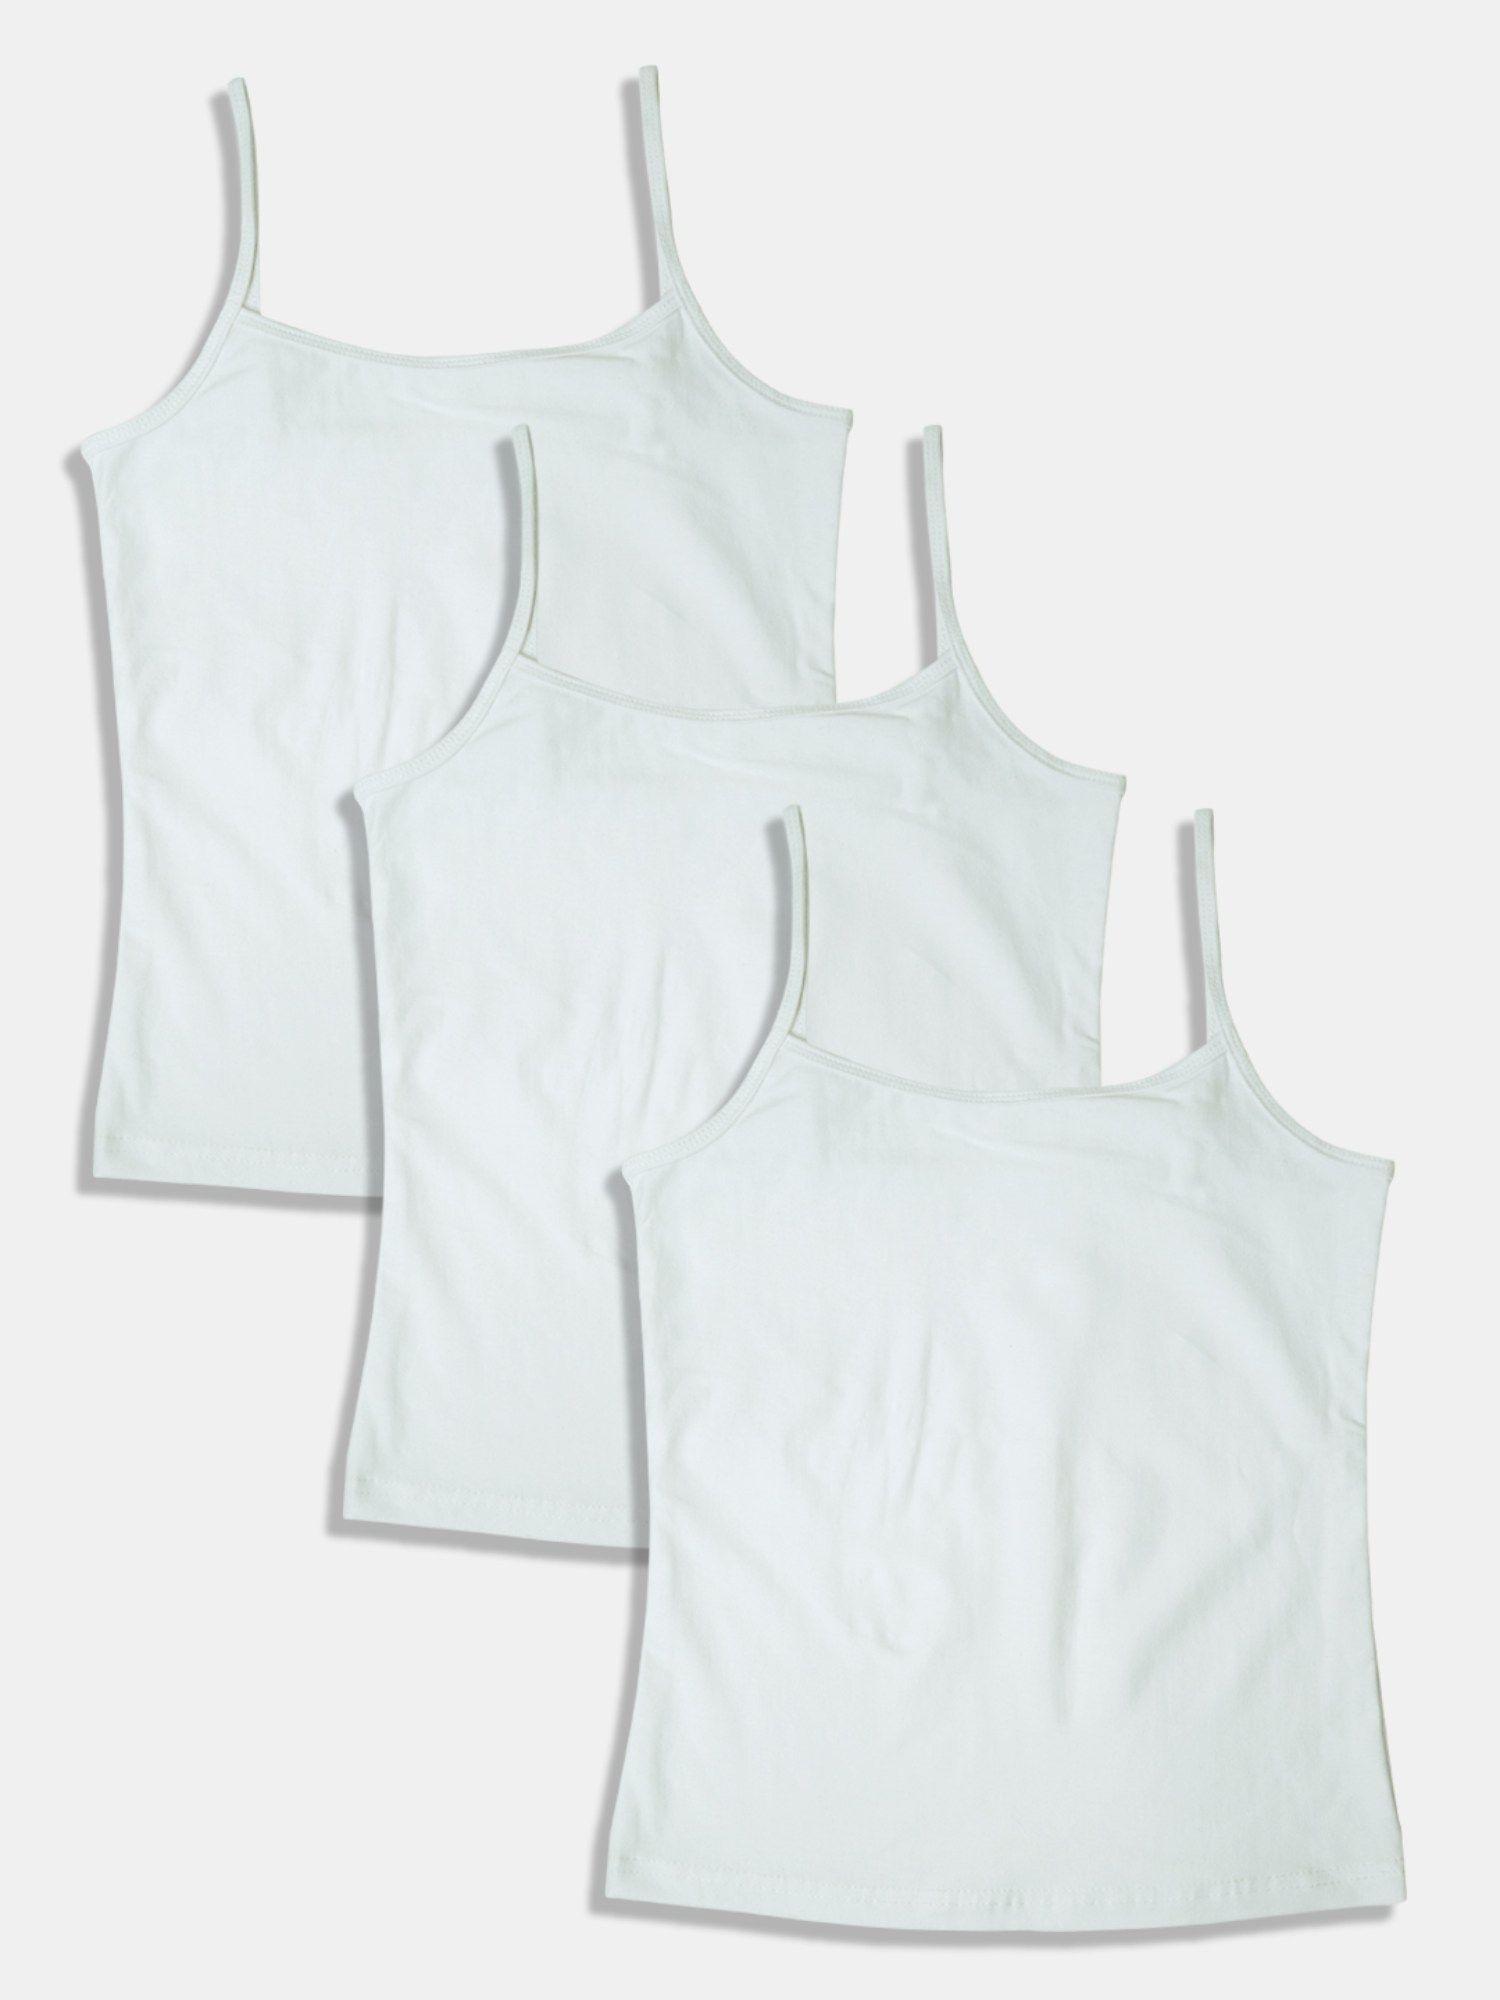 girls-white-camisoles-(pack-of-3)